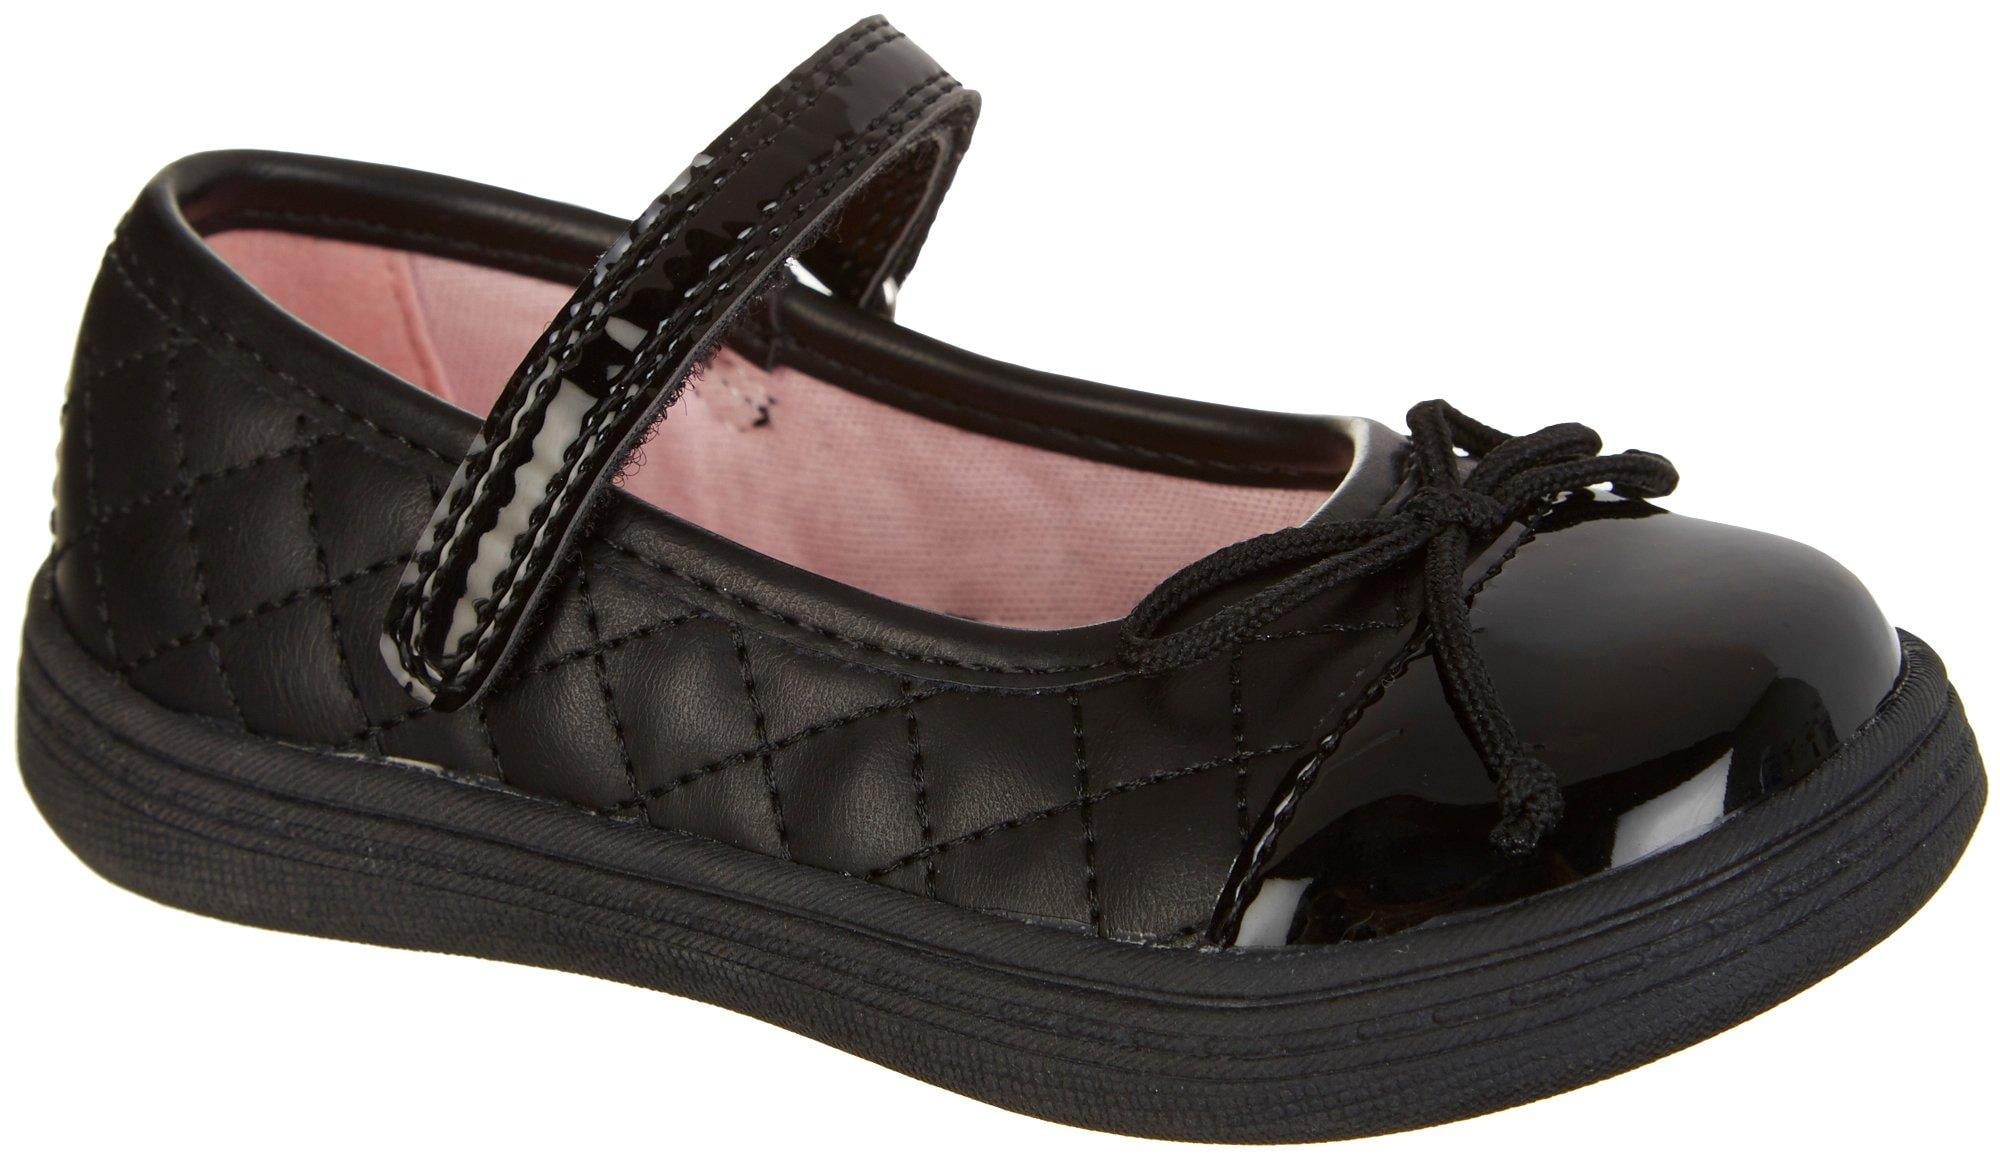 Carters Kids Quilted Mary Jane Ballet Flat 